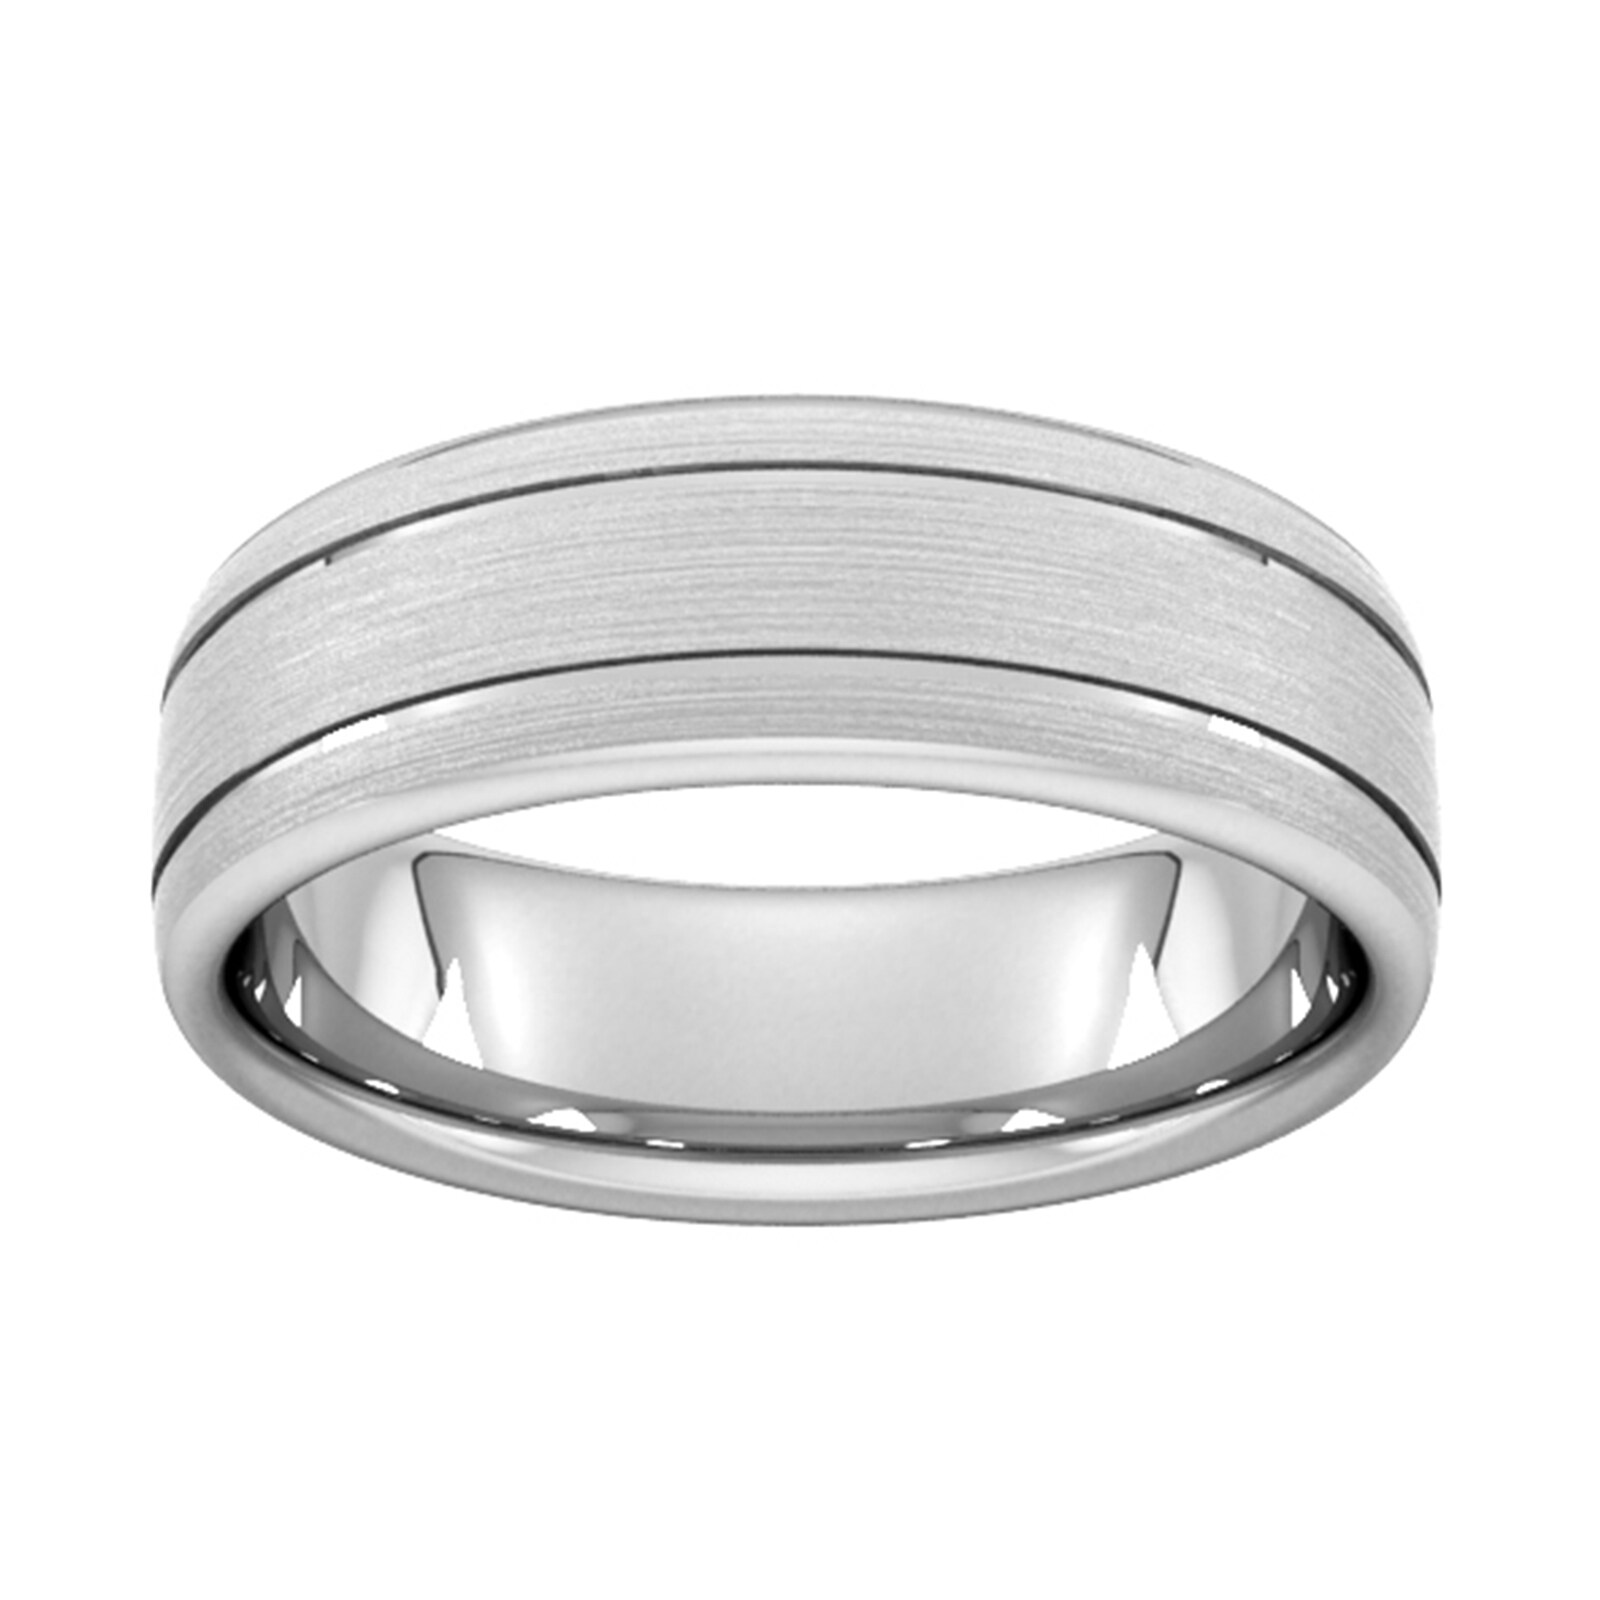 7mm D Shape Heavy Matt Finish With Double Grooves Wedding Ring In 9 Carat White Gold - Ring Size O